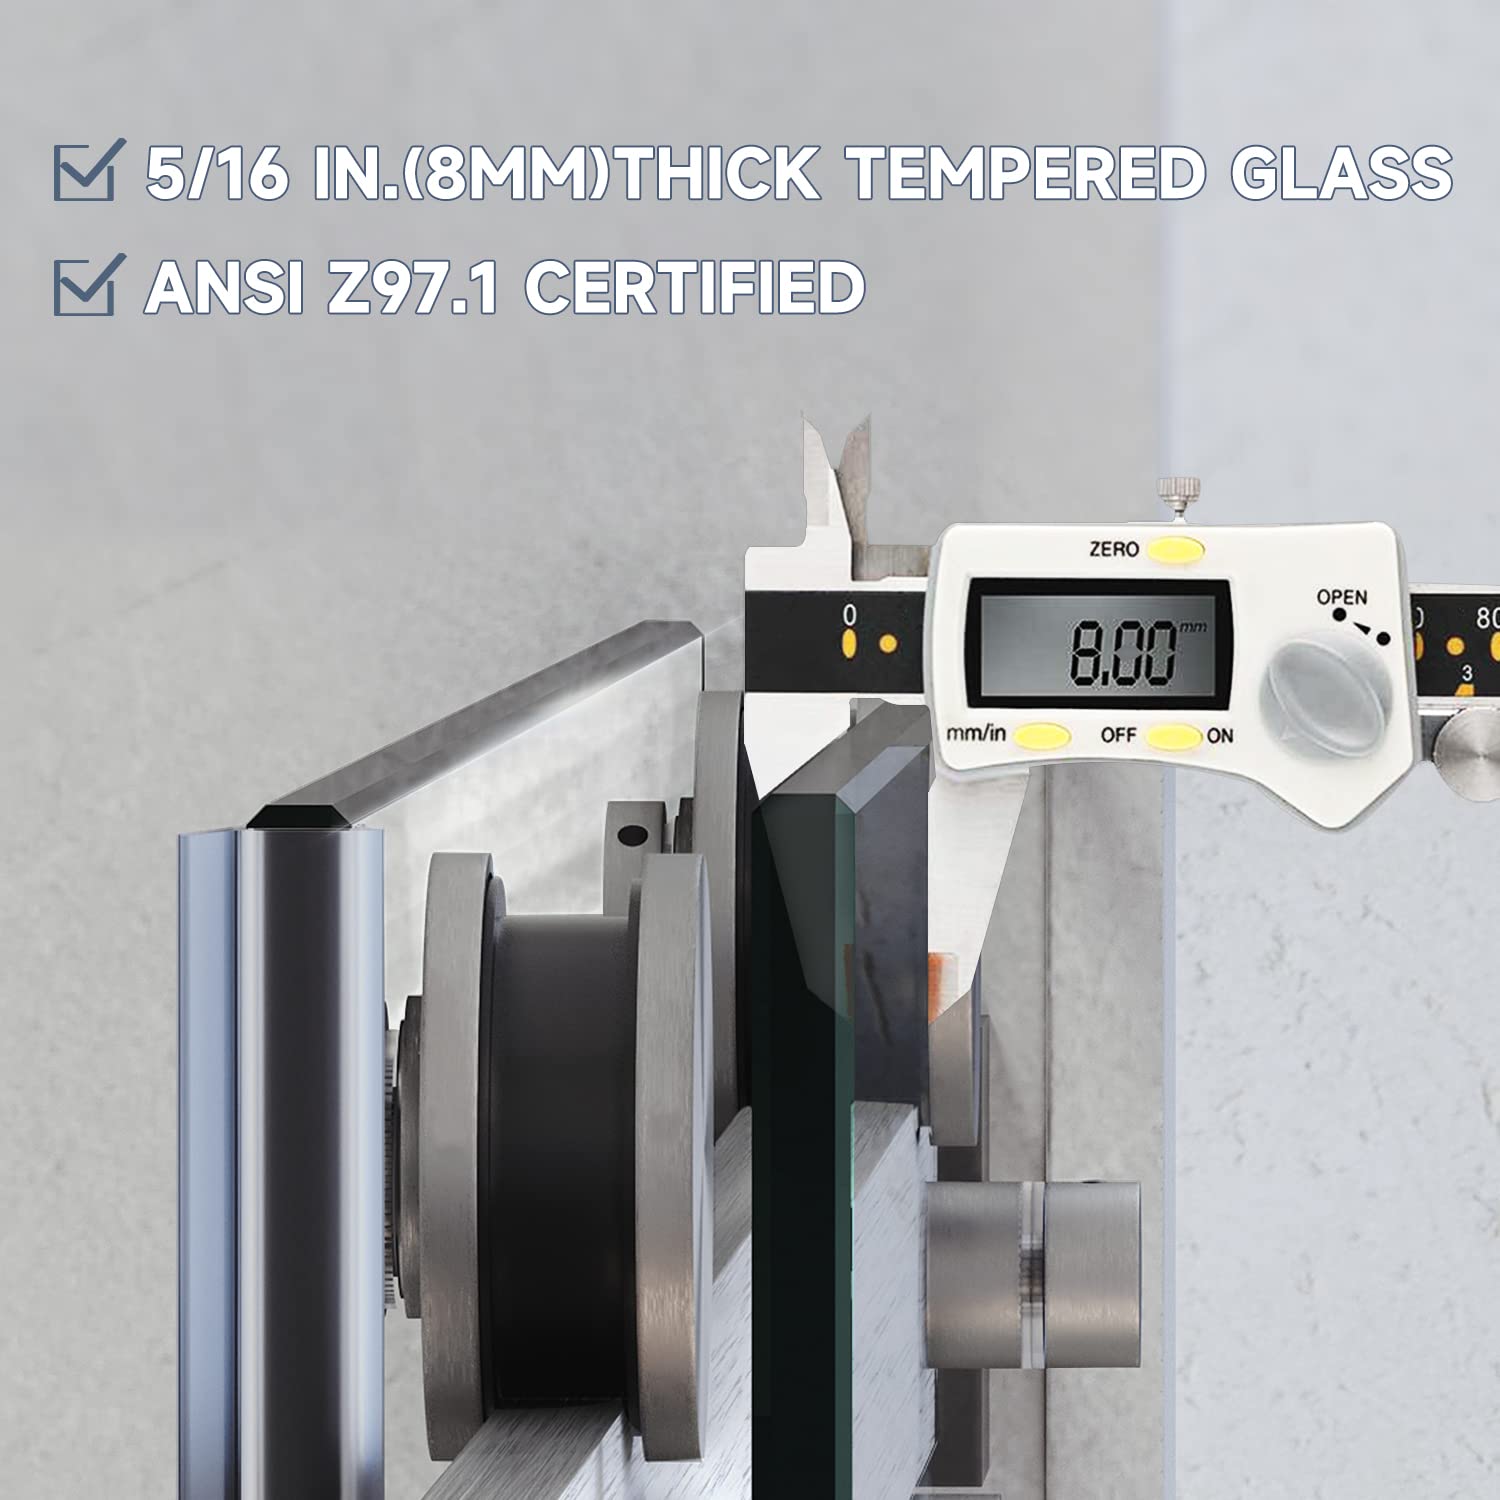 Certified by ANSI Z97.1, 5/16 inches (8mm) tempered glass is thicker and more explosion-proof. 